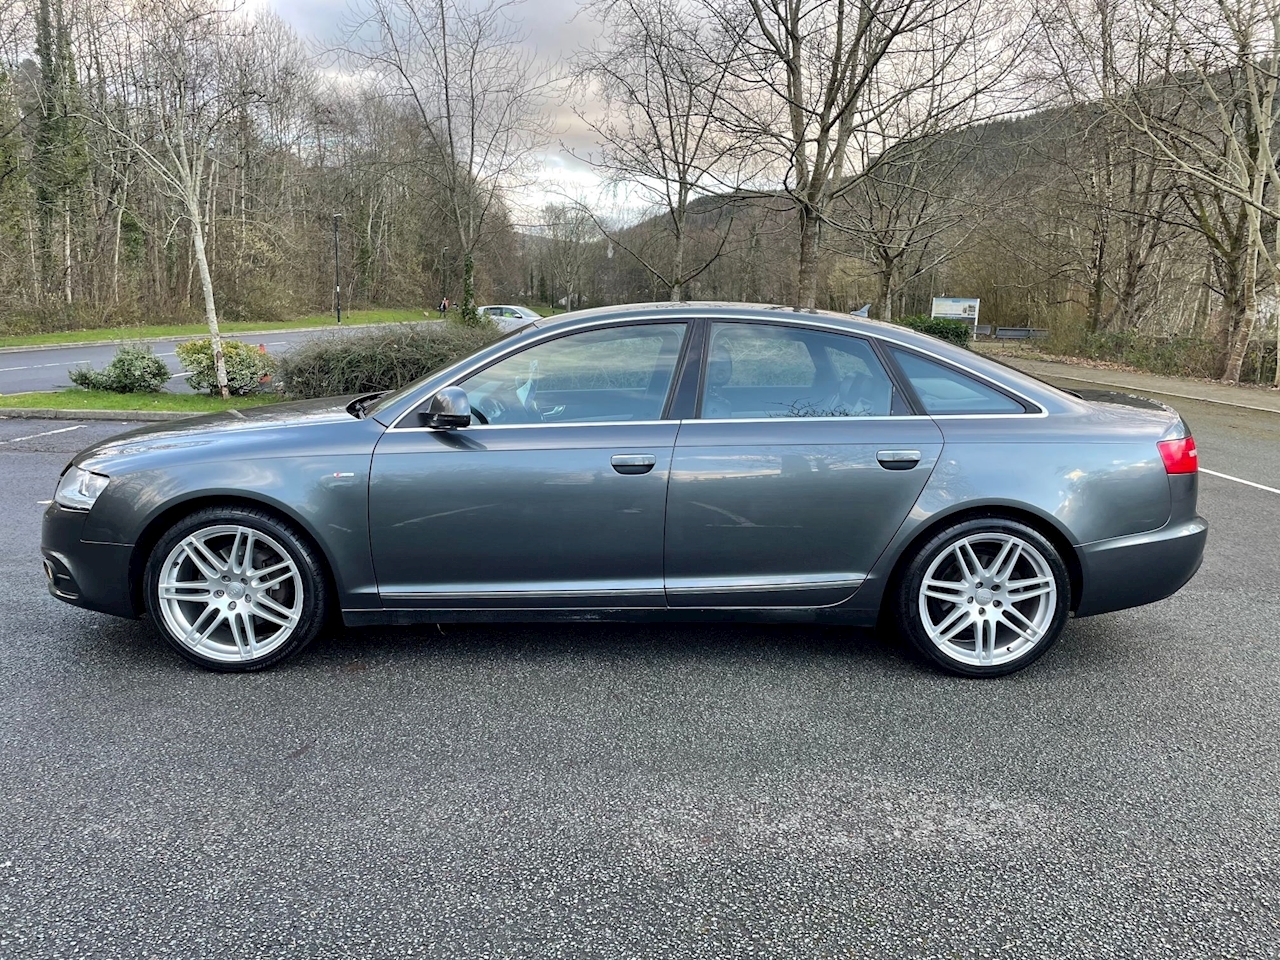 2.0 TDI S line Special Edition Saloon 4dr Diesel Multitronic (153 g/km, 168 bhp)